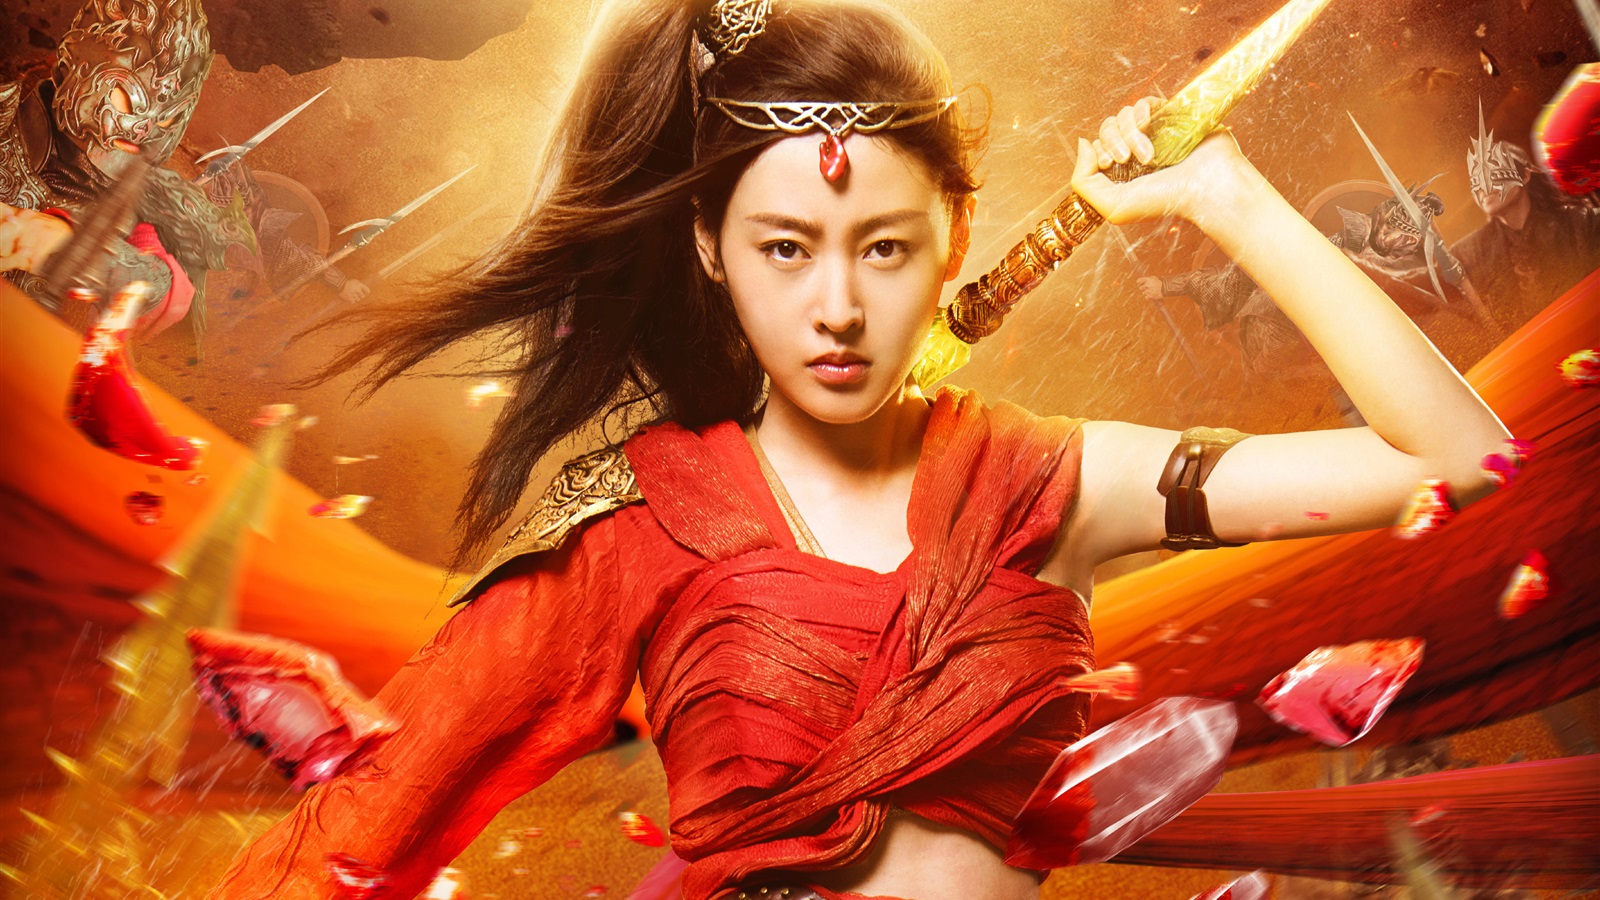 Wallpaper Crystal Zhang Martial Universe HD Picture Image